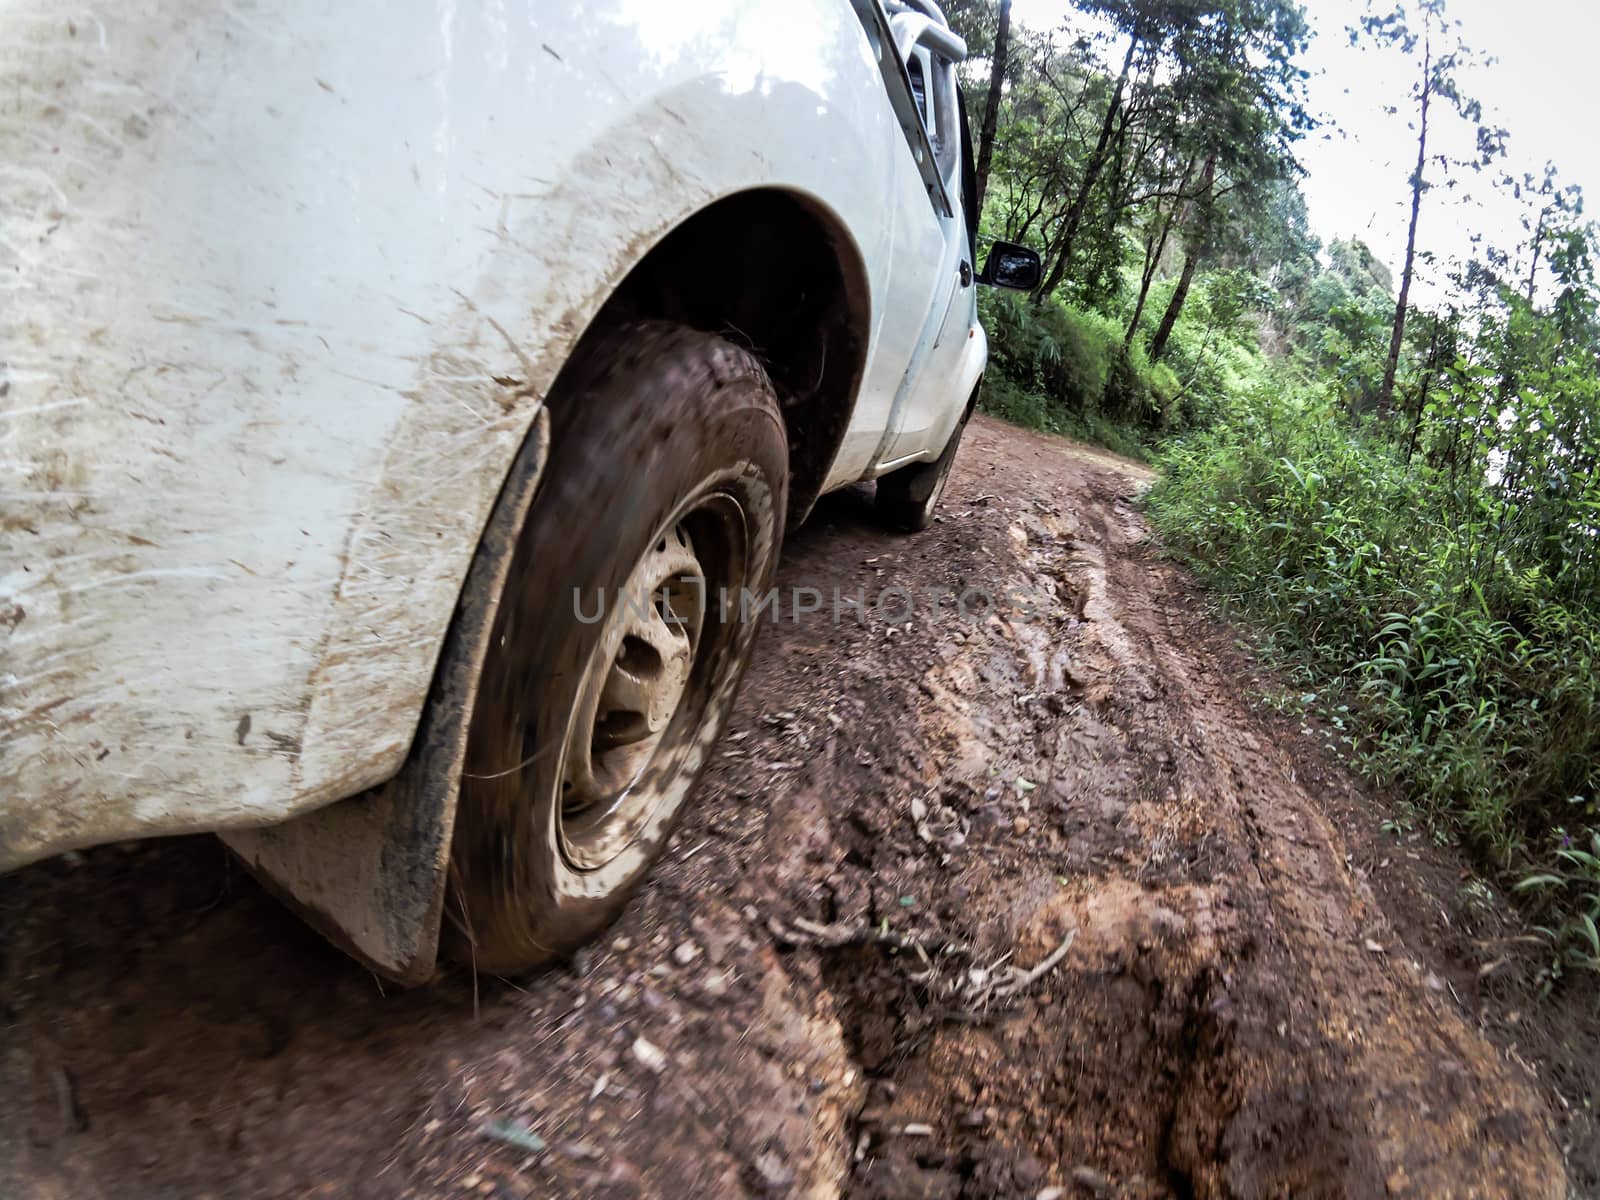 The car's wheels on the dirt road. by ronnarong